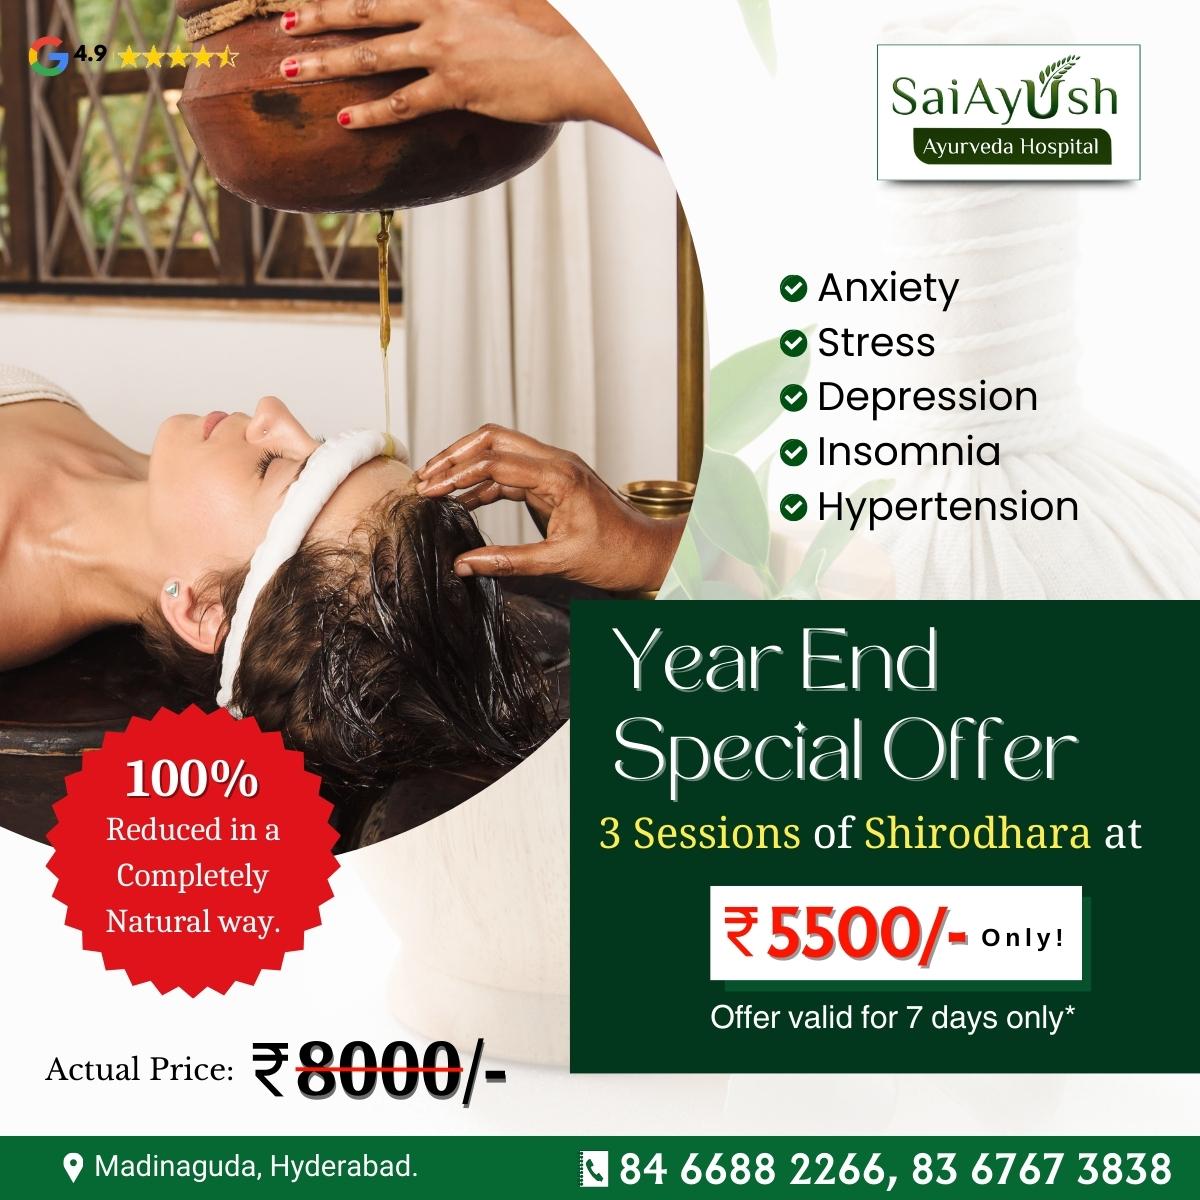 Shirodhara-Year End Special Offer